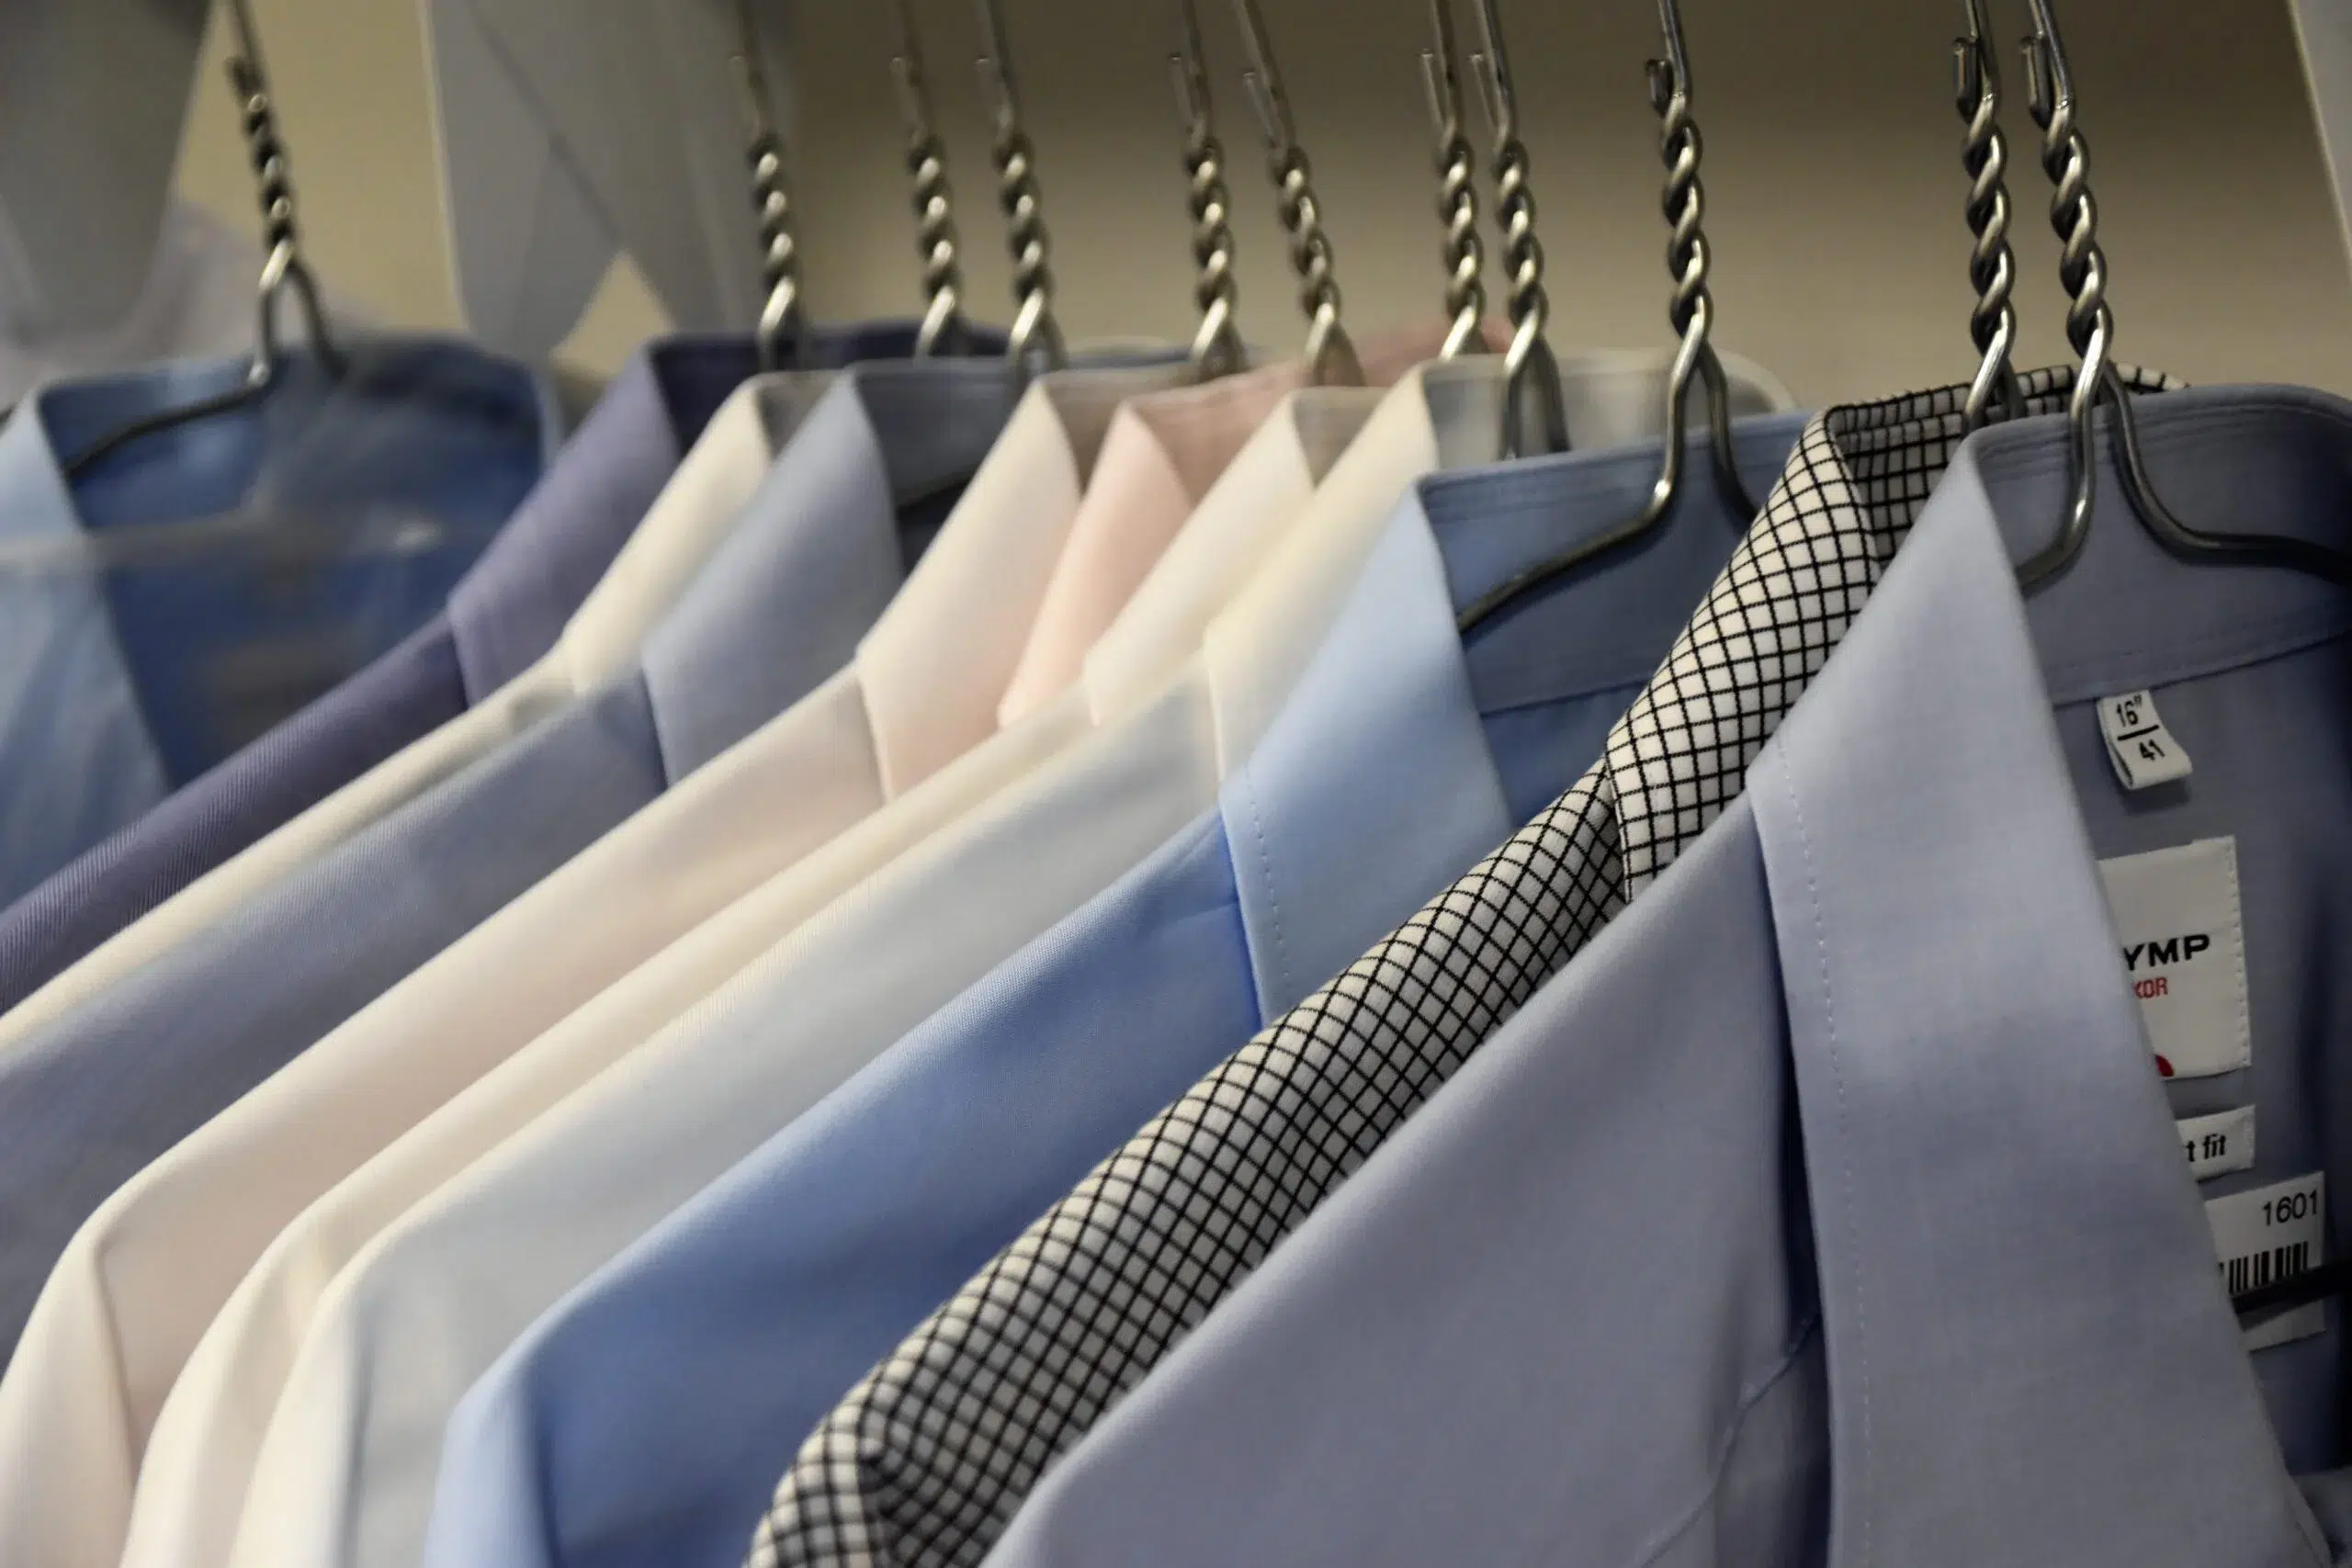 A row of dry cleaned shirts illustrating our textile care division